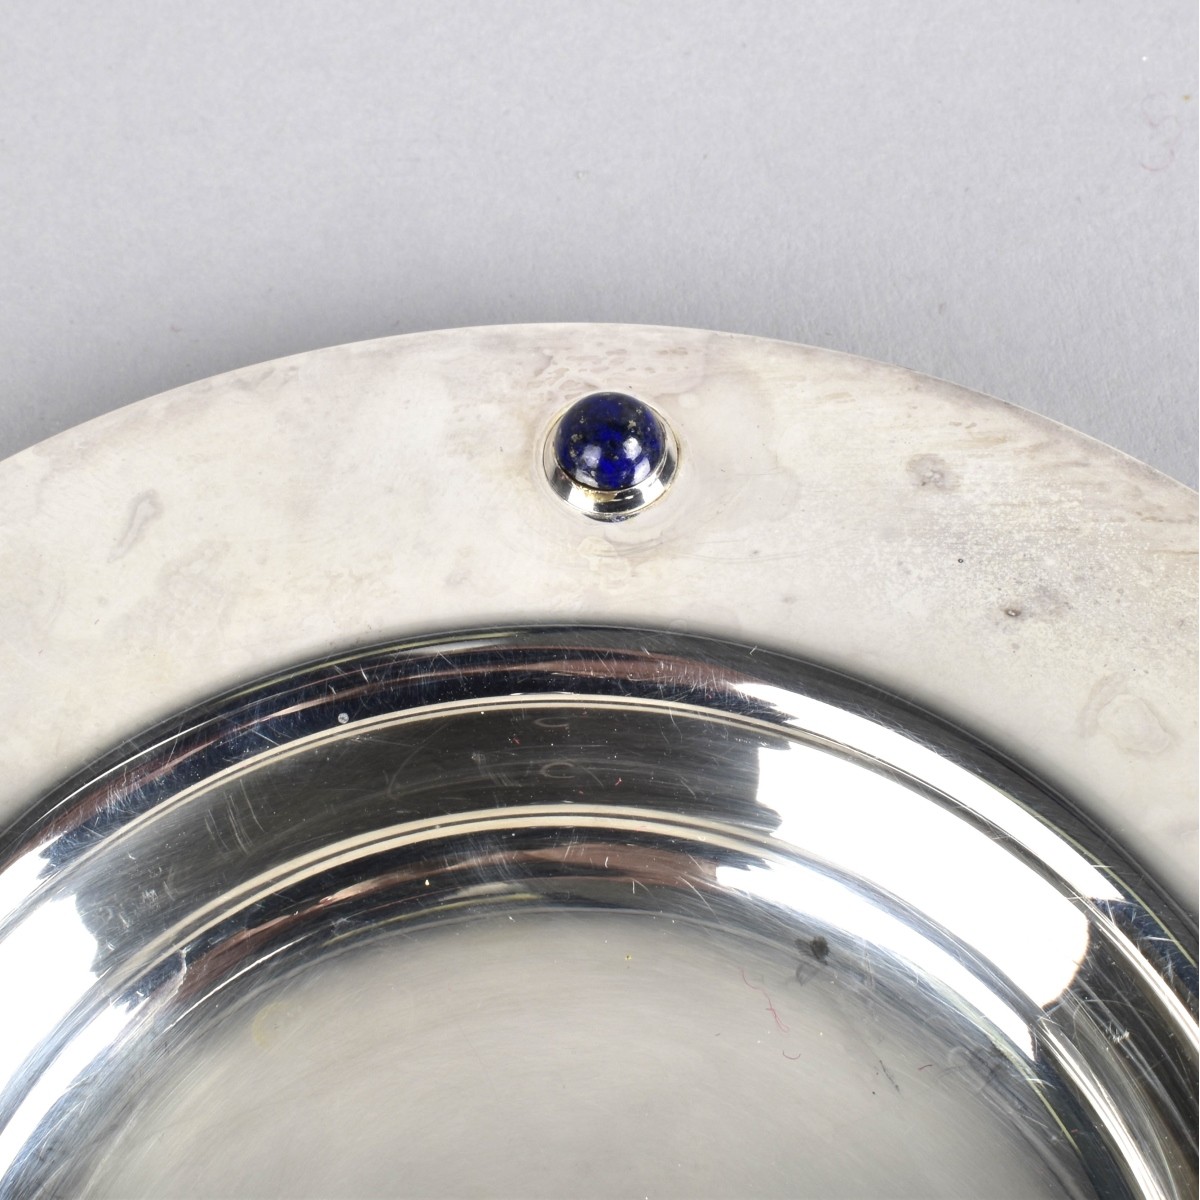 Cartier Silver Clad with Lapis Ashtray